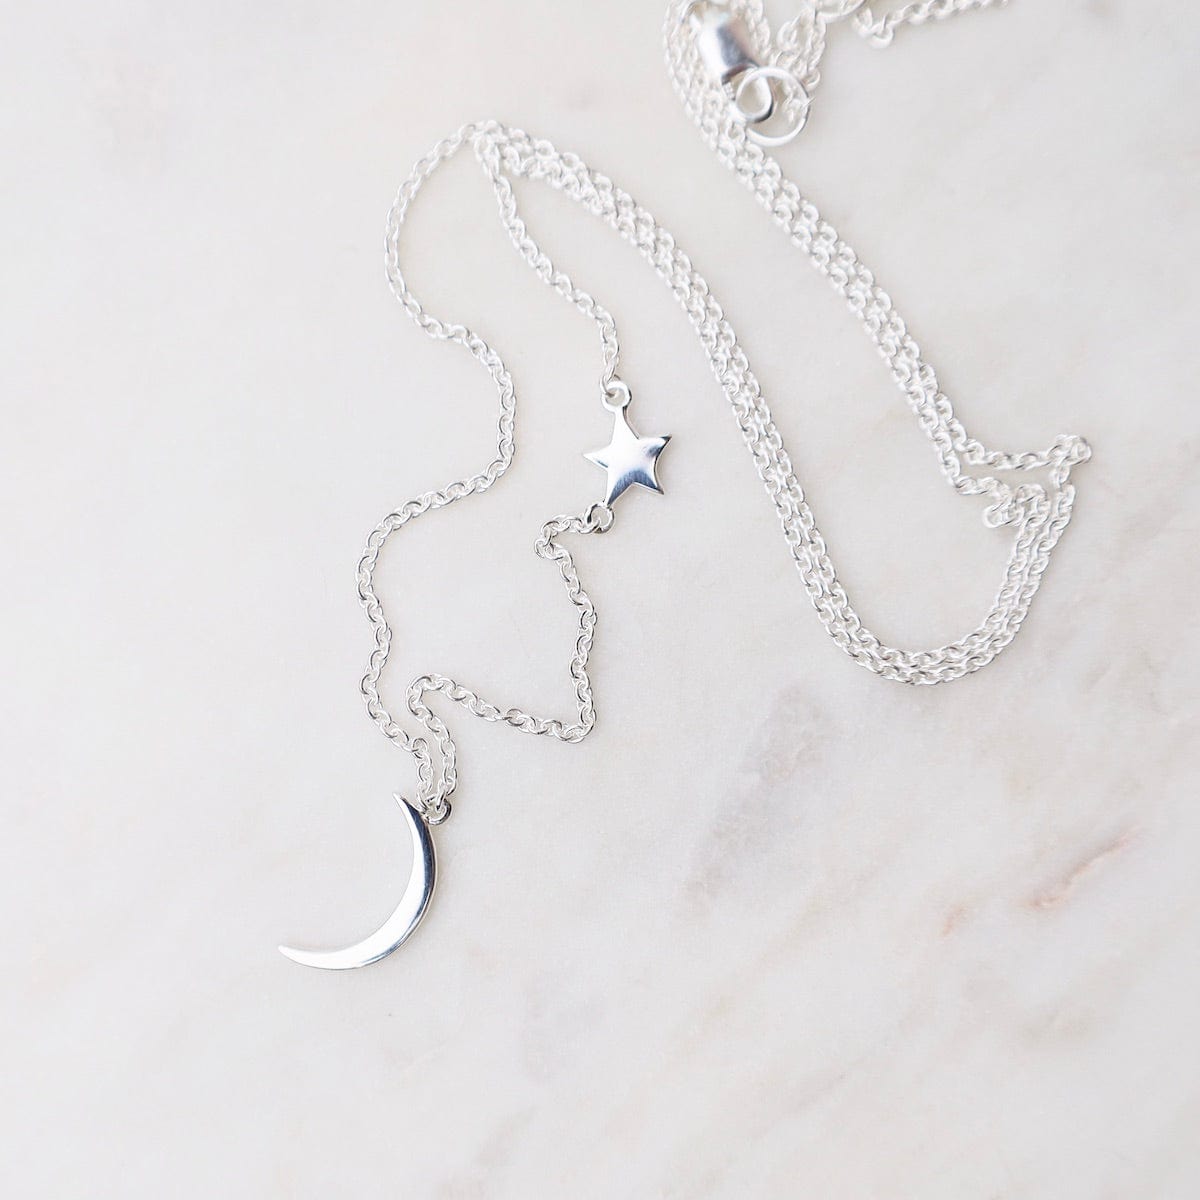 NKL Moon & Star Necklace - Sterling Silver